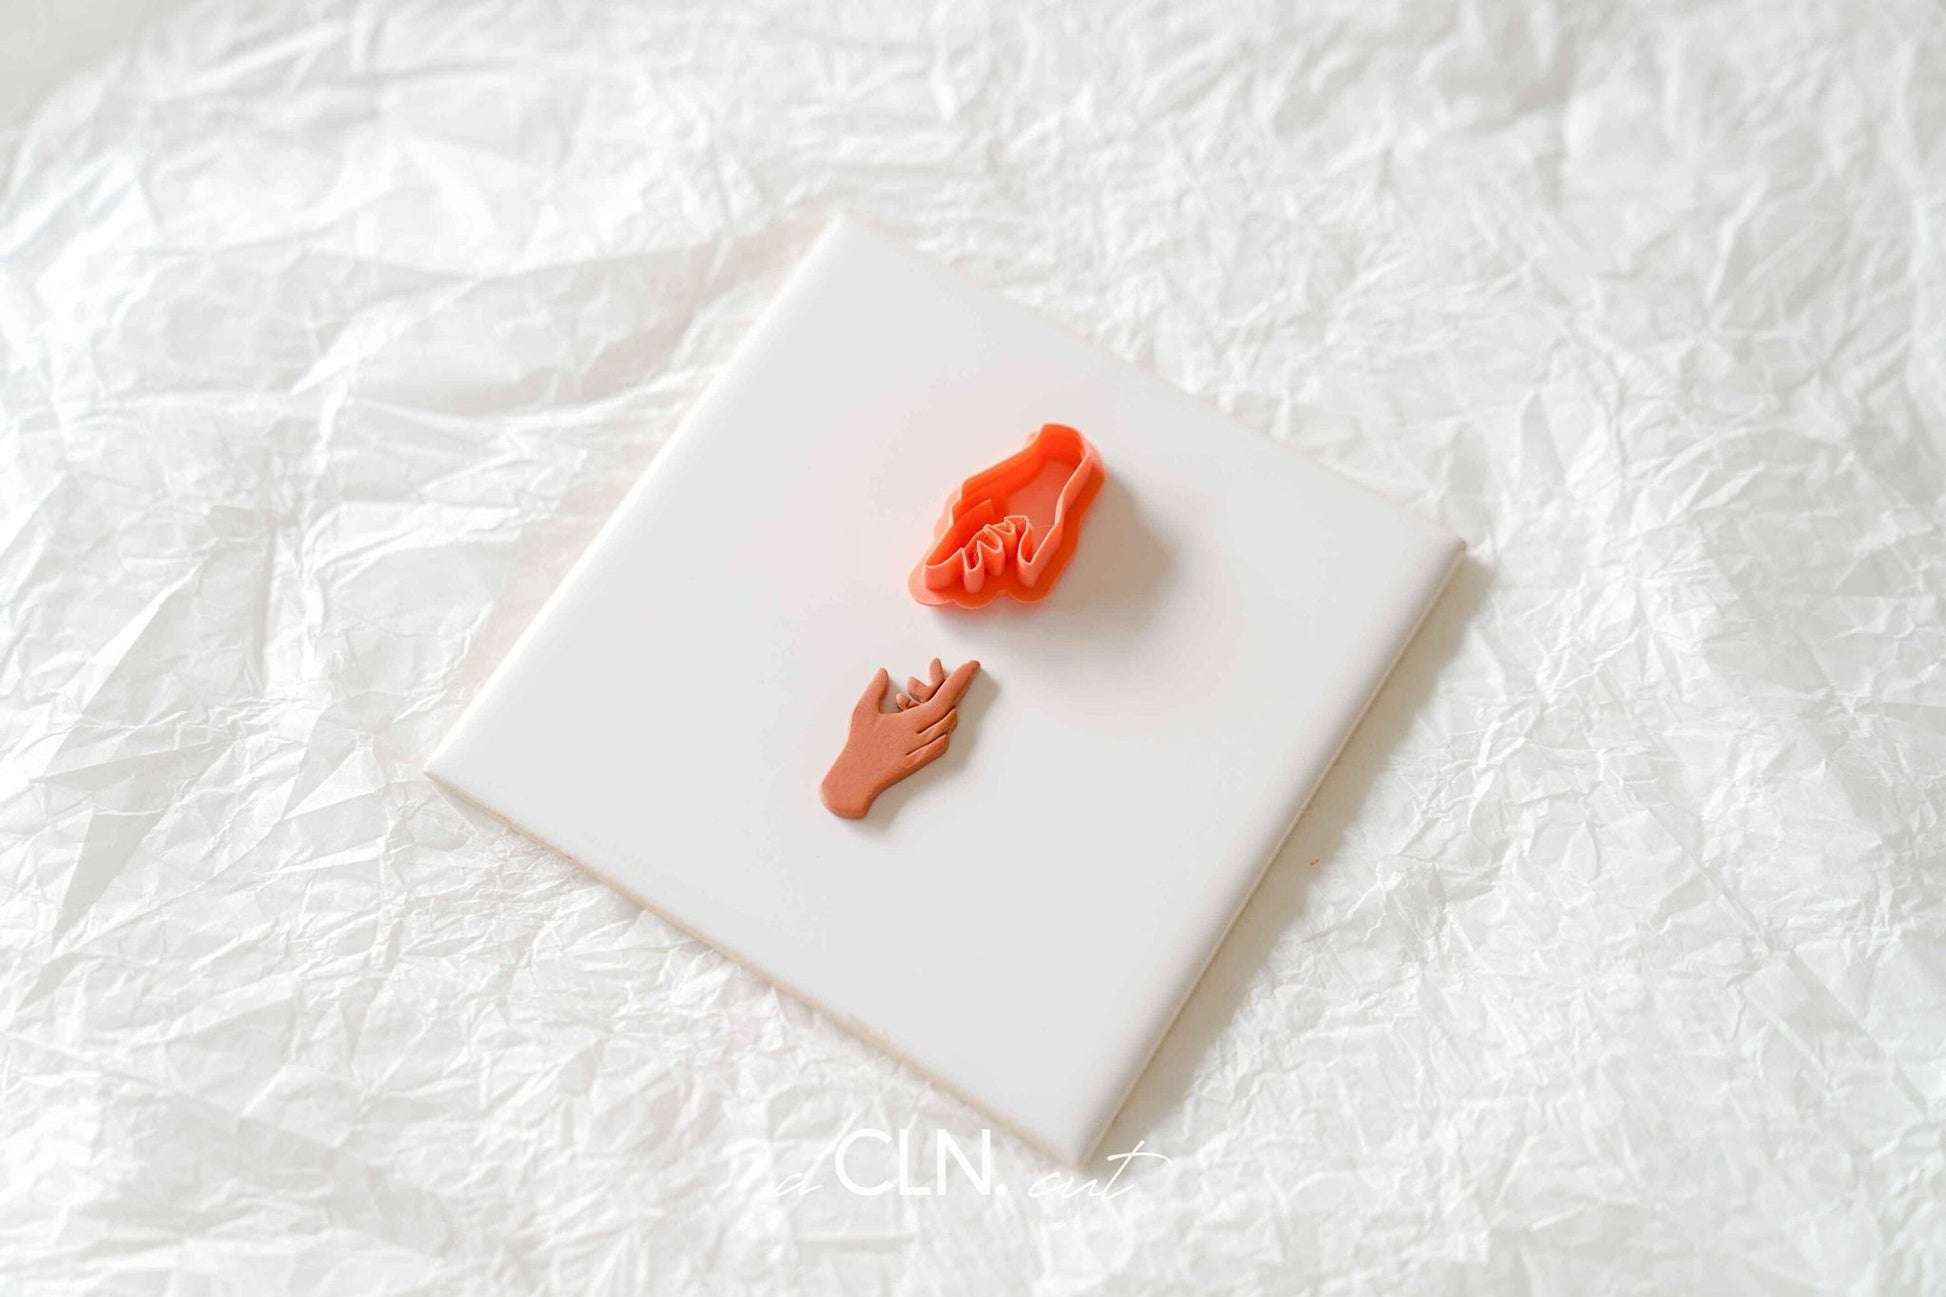 Embossed hand - Cutter - CLN Atelier